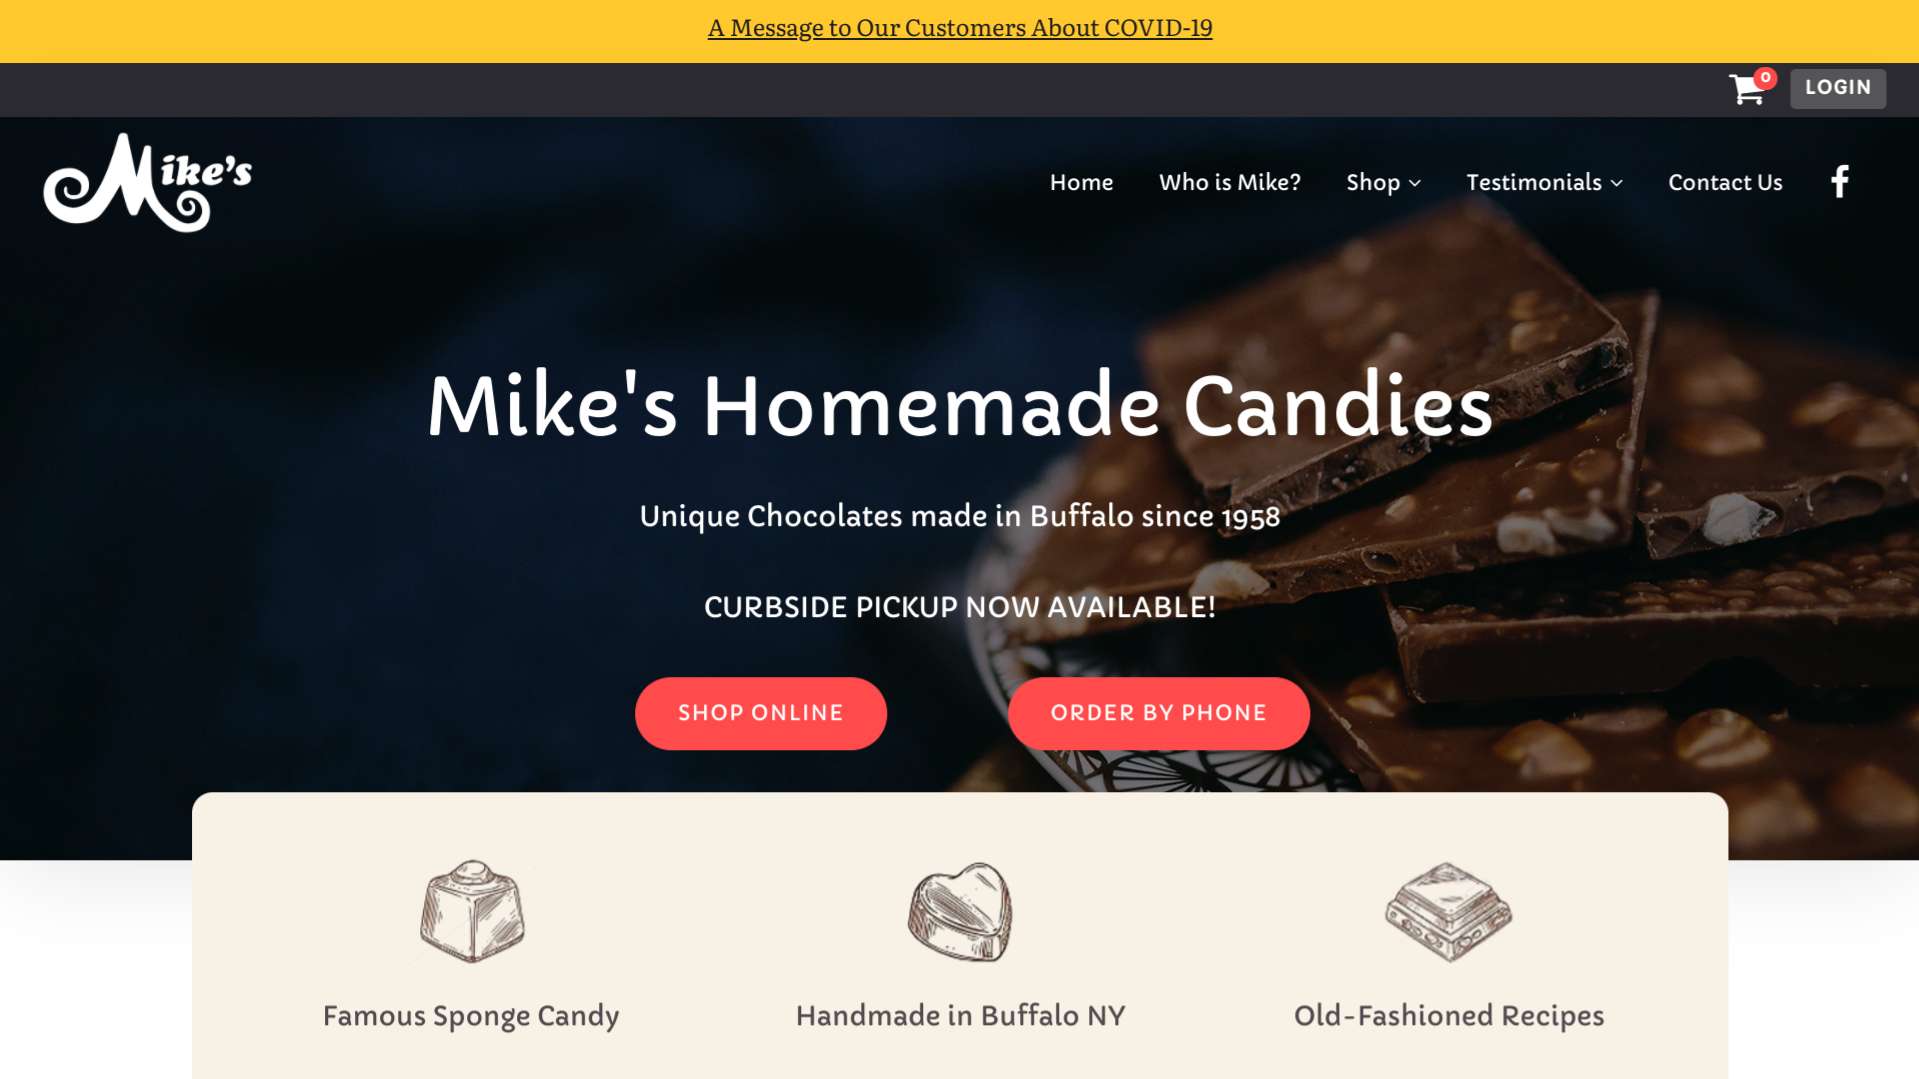 Mike's Homemade Candies